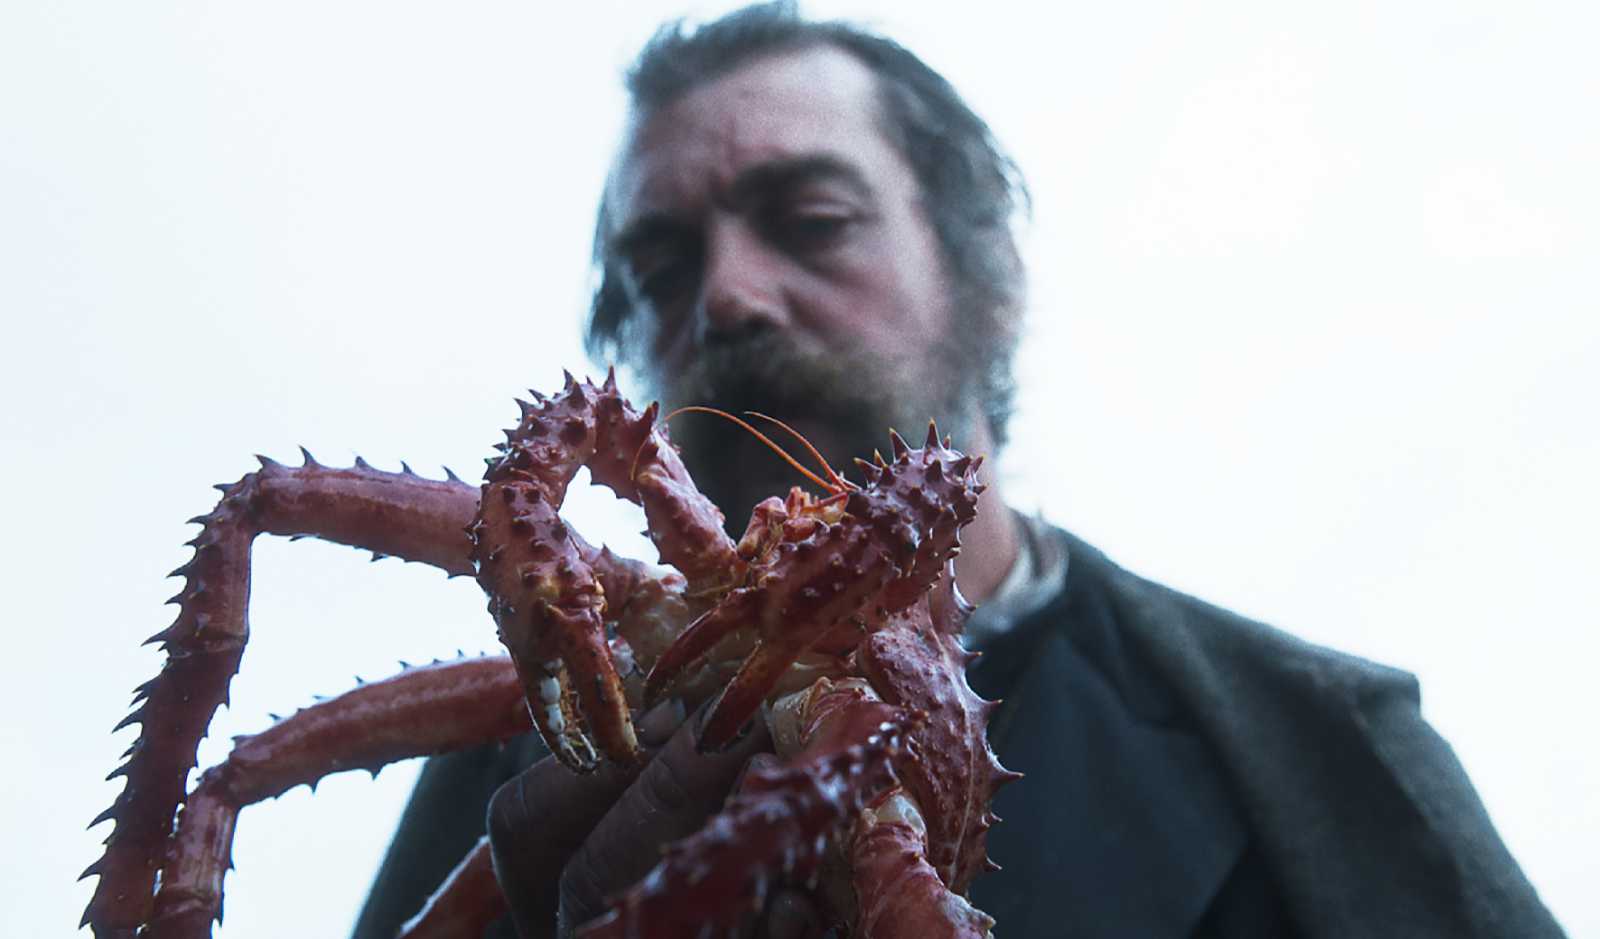 The Tale of King Crab - Film Review The story of luckless Luciano banished to the end of the world